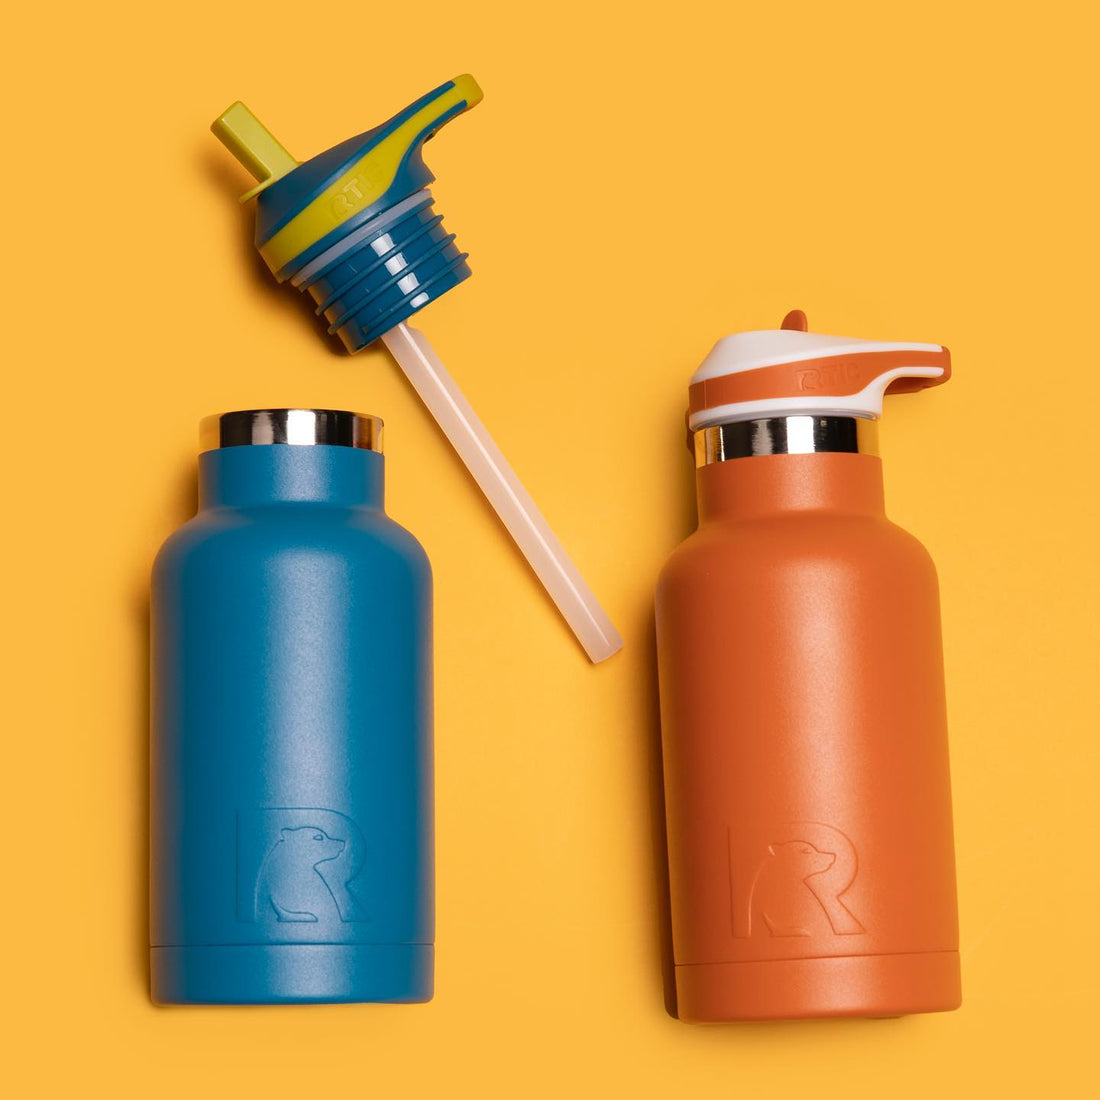 RTIC cub bottles in blue and orange